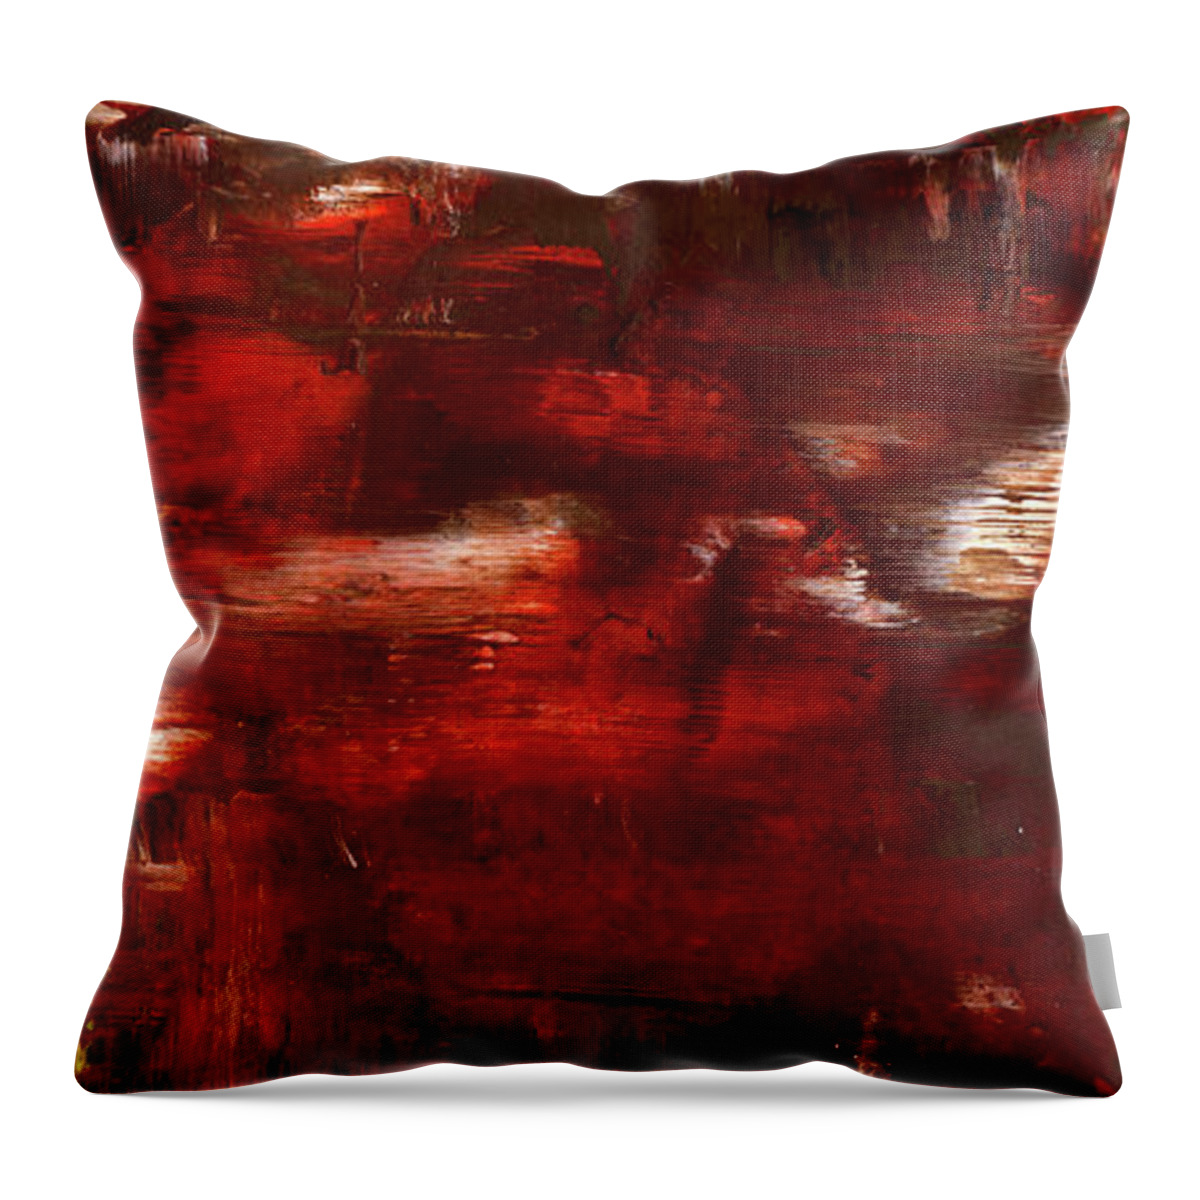 Abstract Throw Pillow featuring the painting Enigma - Large Contemporary Earth Tone Painting by Modern Abstract